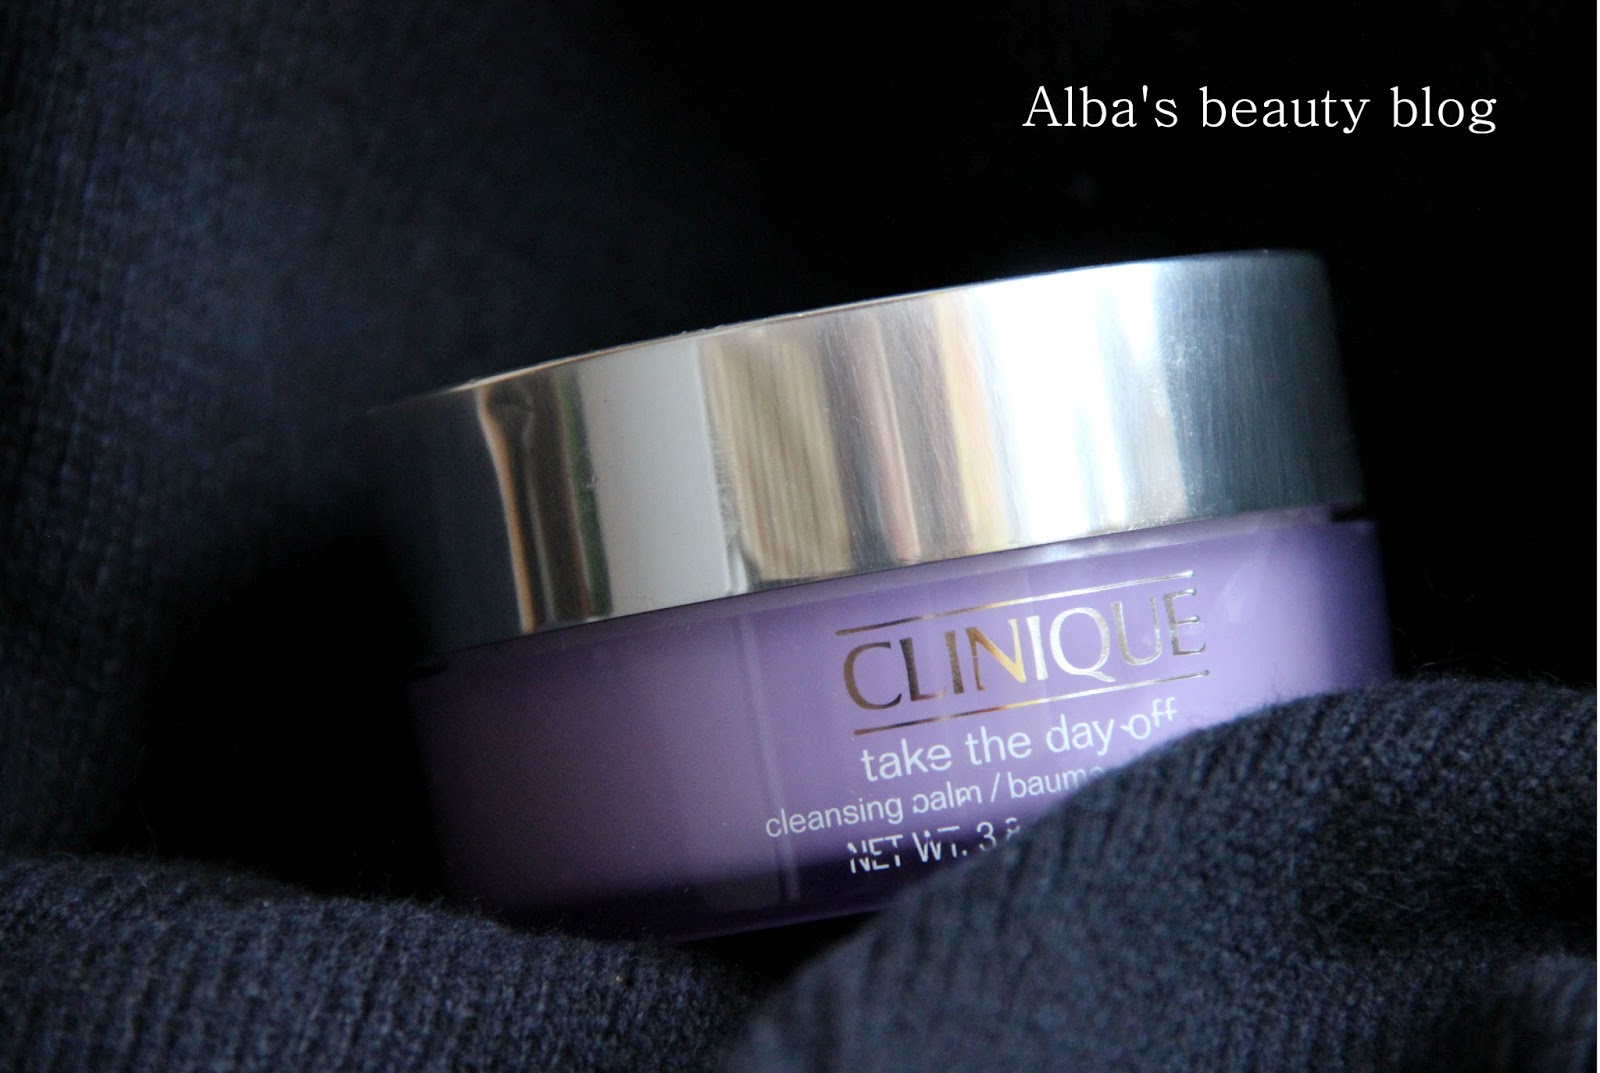 Очищающий бальзам для лица Clinique. Очищающий бальзам Clinique. Clinique take the Day off Cleansing Balm с углем. Clinique New take the Day off Charcoal Cleansing Balm. Take the day off cleansing